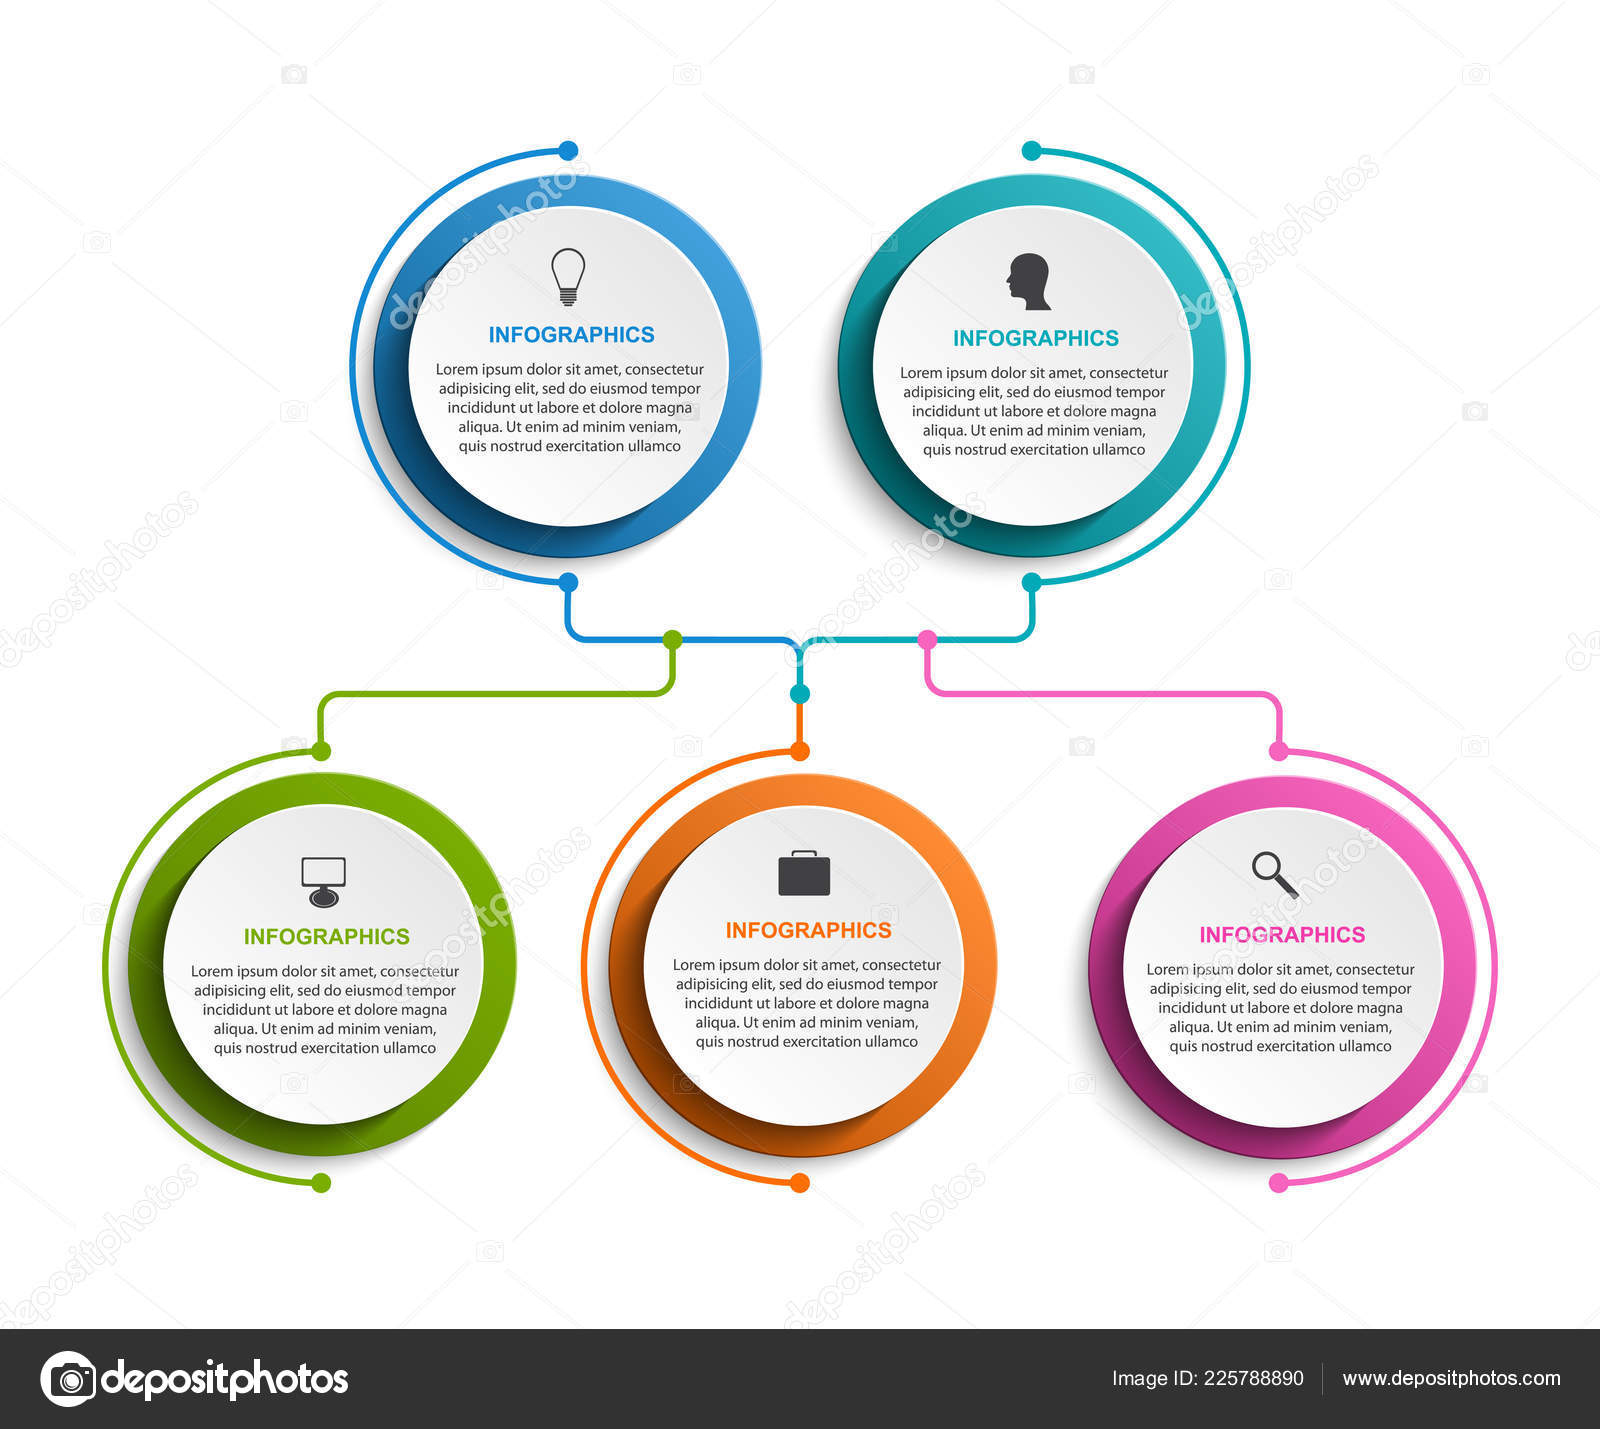 Infographic Design Organization Chart Template Stock Illustration - Download Image Now - iStock